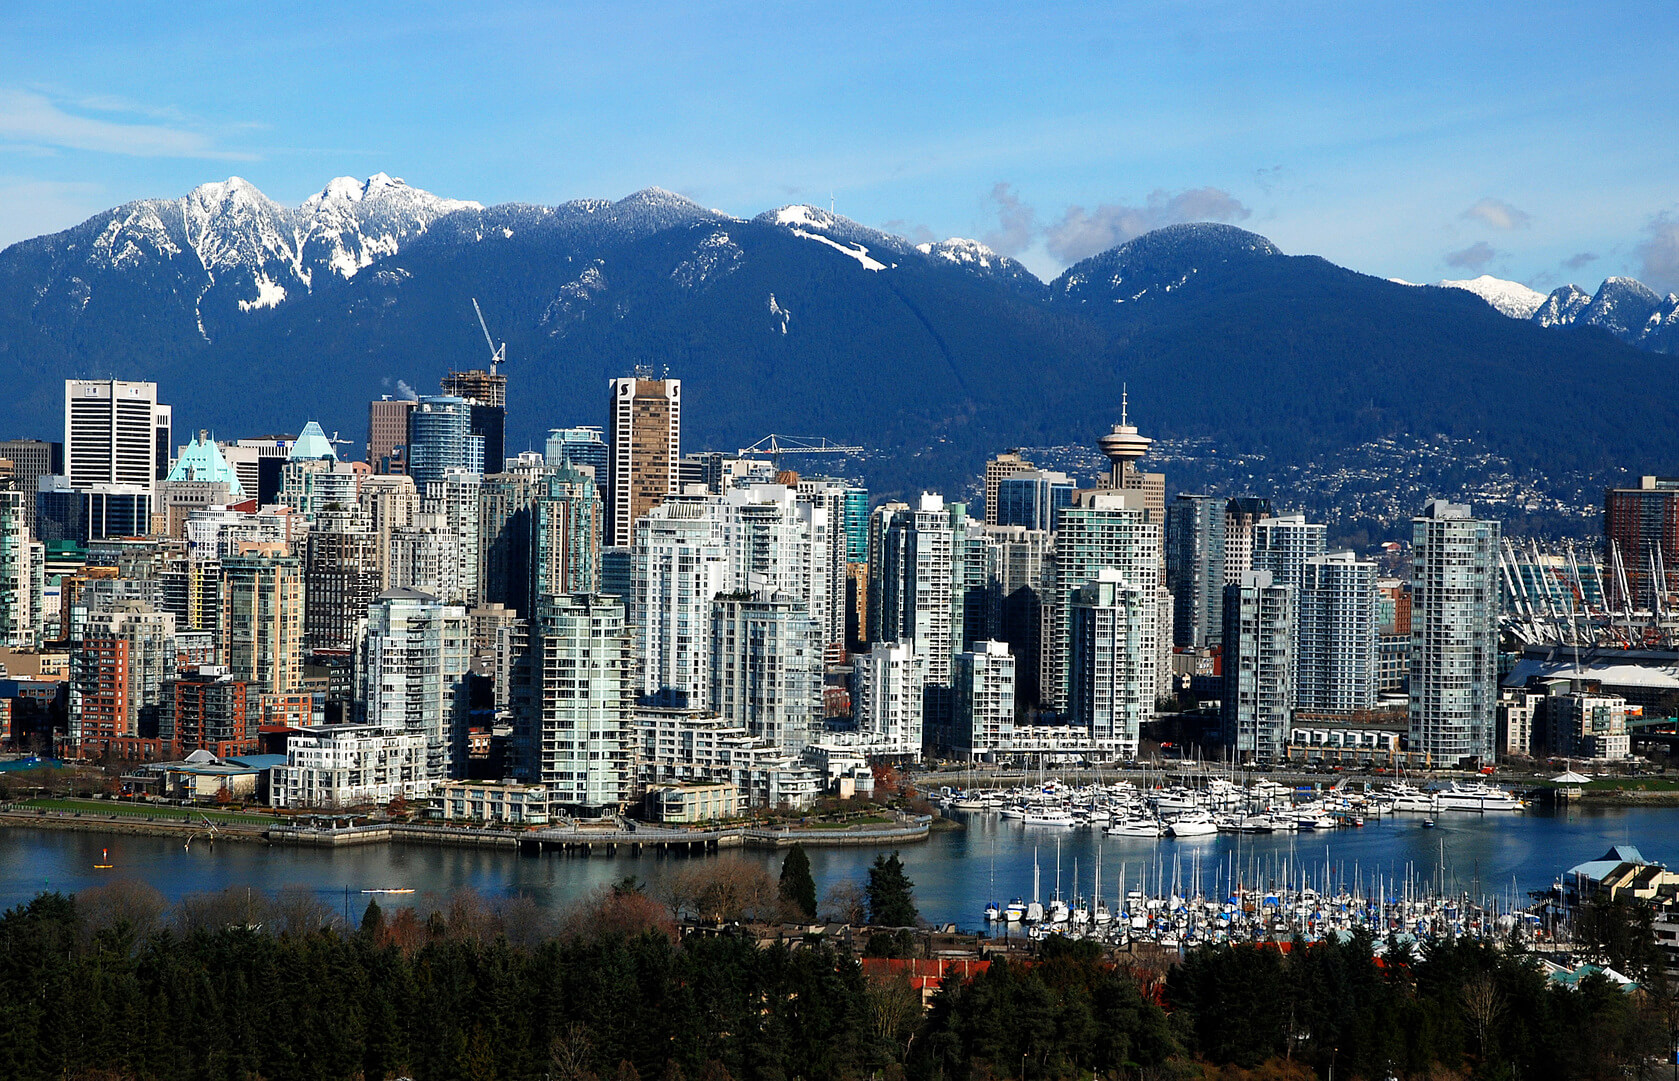 vancouver in the winter time, Vancouver with False Creek in foreground and Grouse Mountain and the North Shore Mountains in background